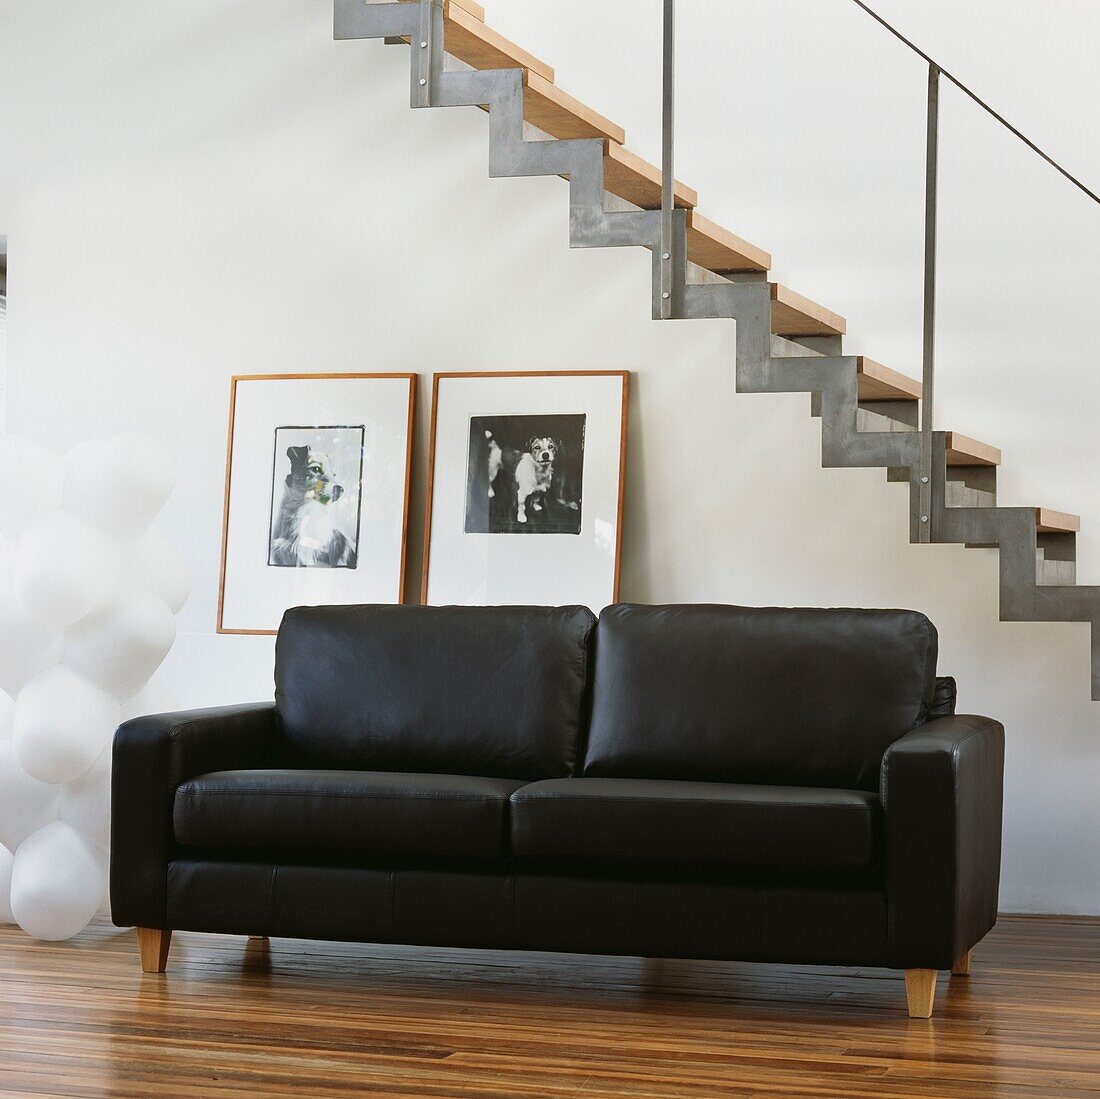 Black leather sofa by staircase and Tom Dixon light